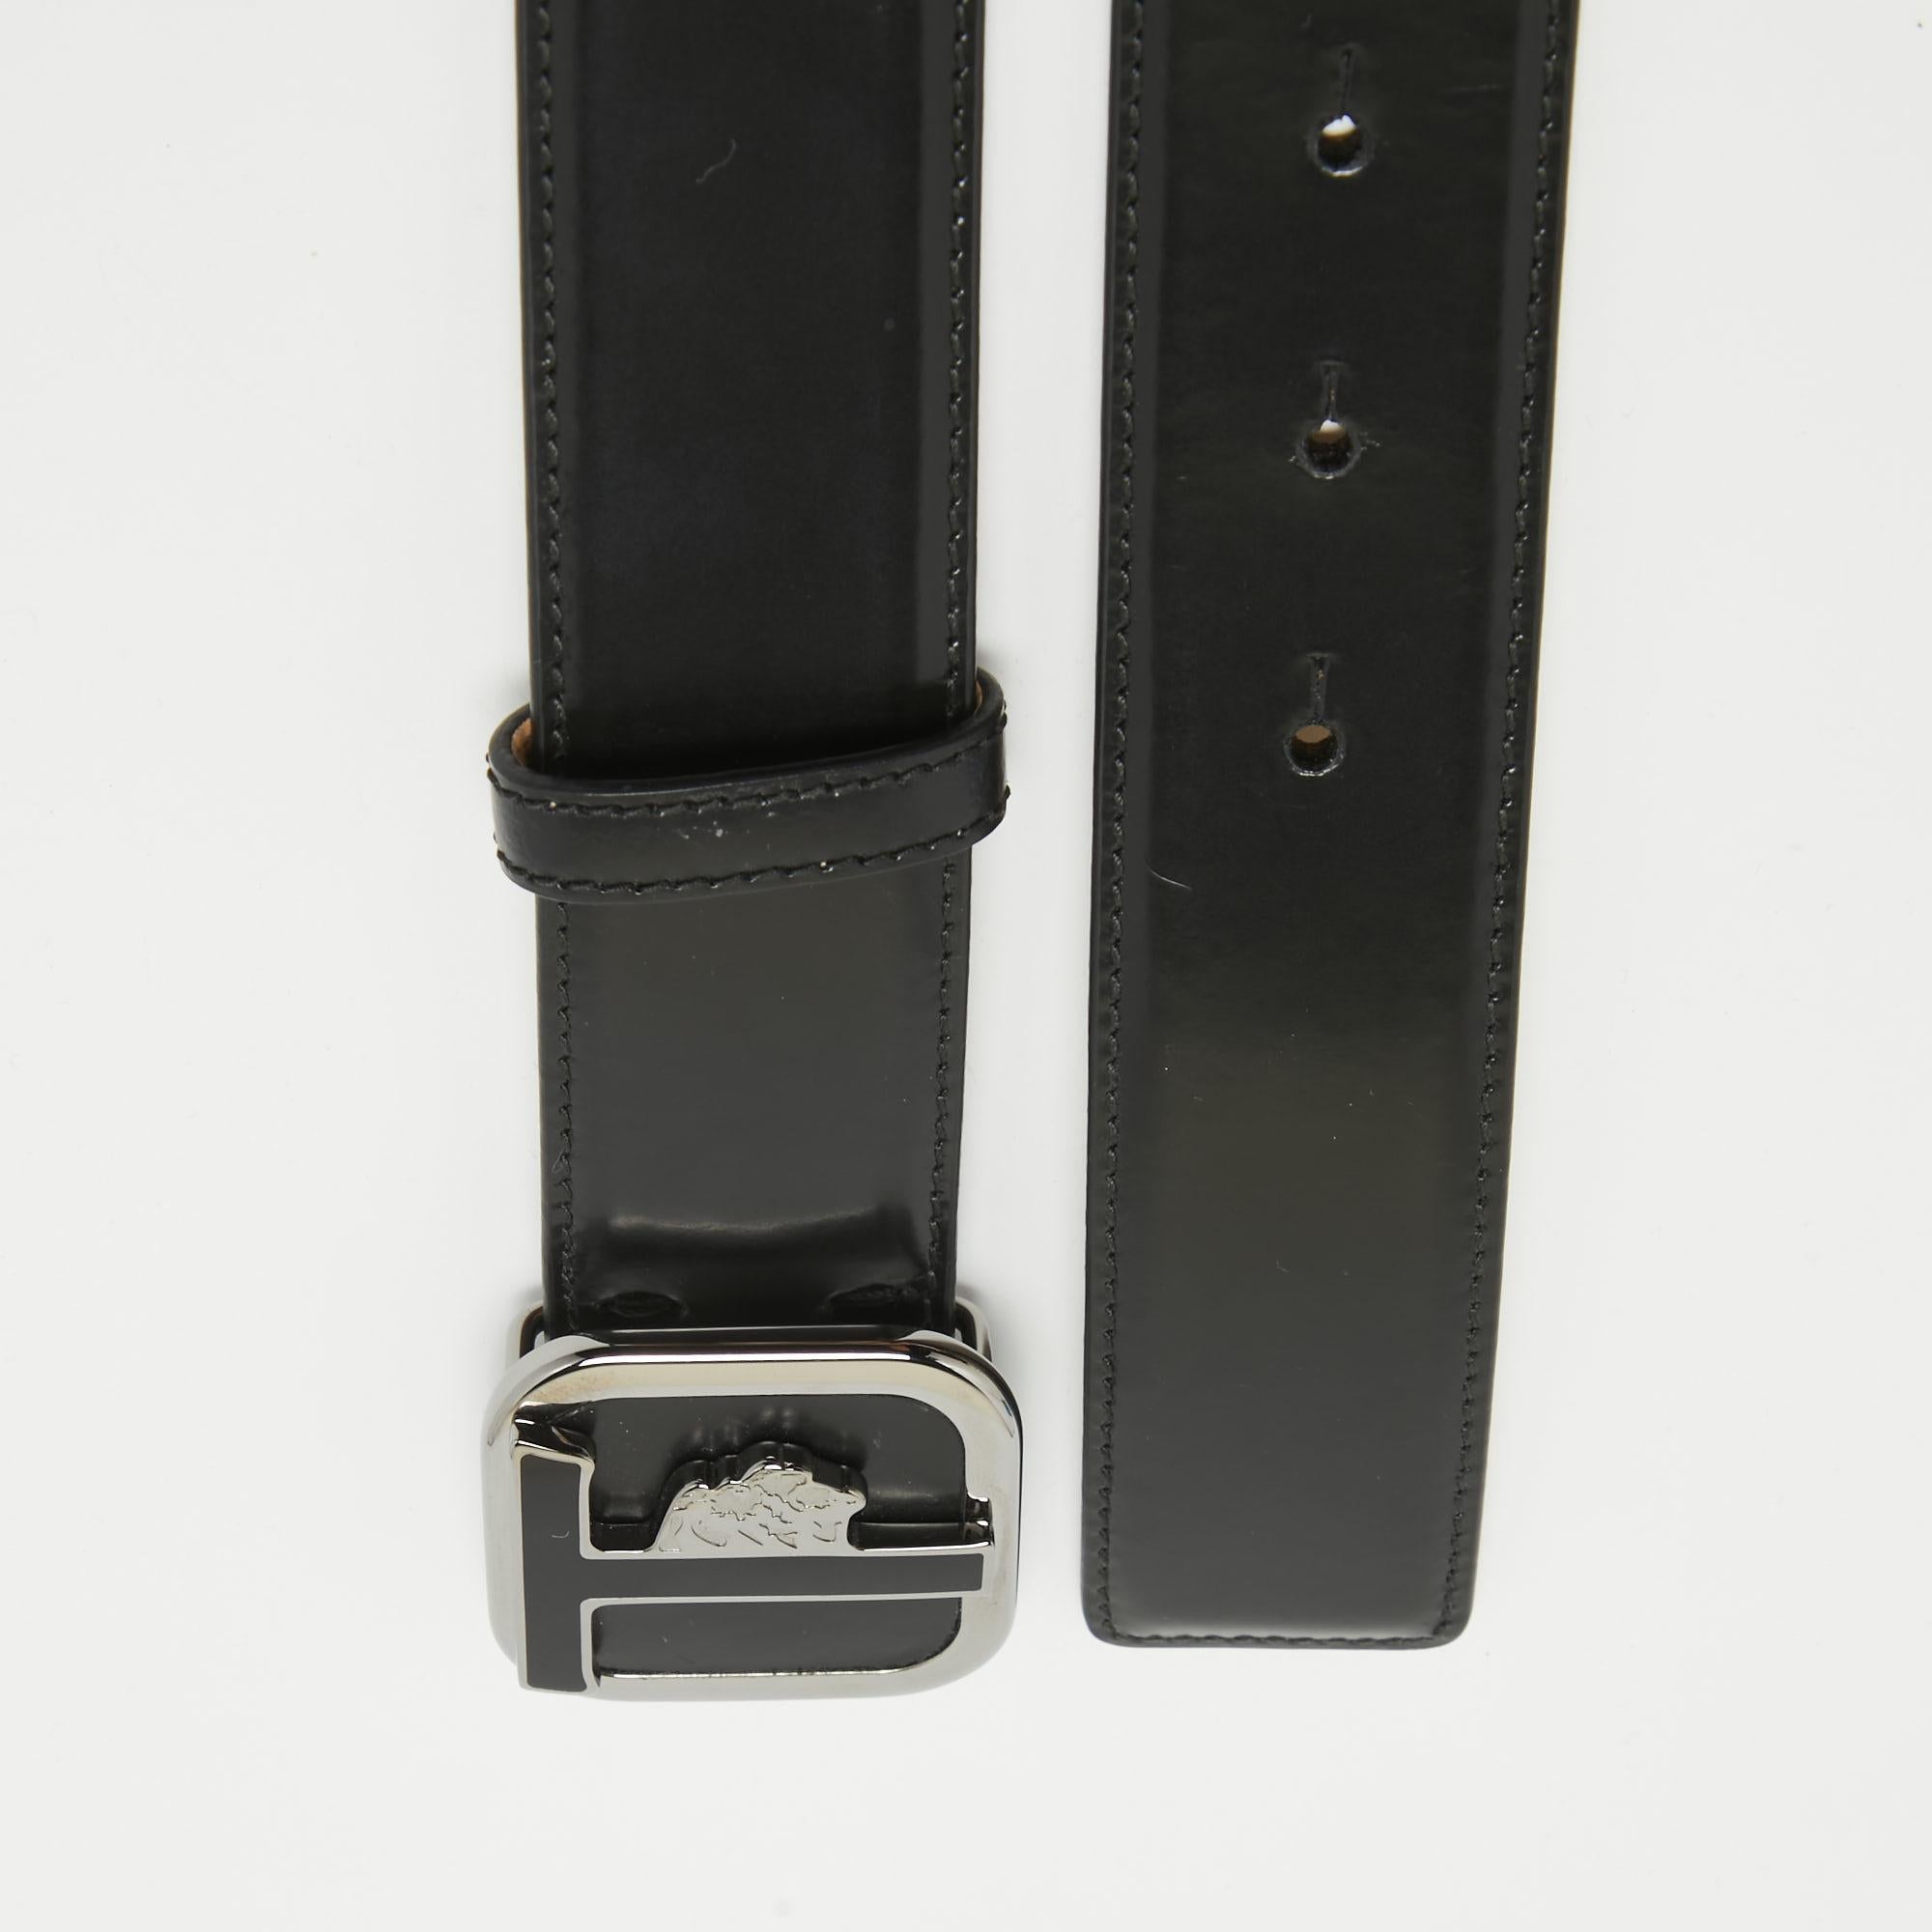 Your belt is not just for your pants to have support staying up, but also for you to show off your style. The Tod's Black Glossy Leather Leoni Buckle Belt is subtle and demure and at the same time stands out bold with its sleek black leather body